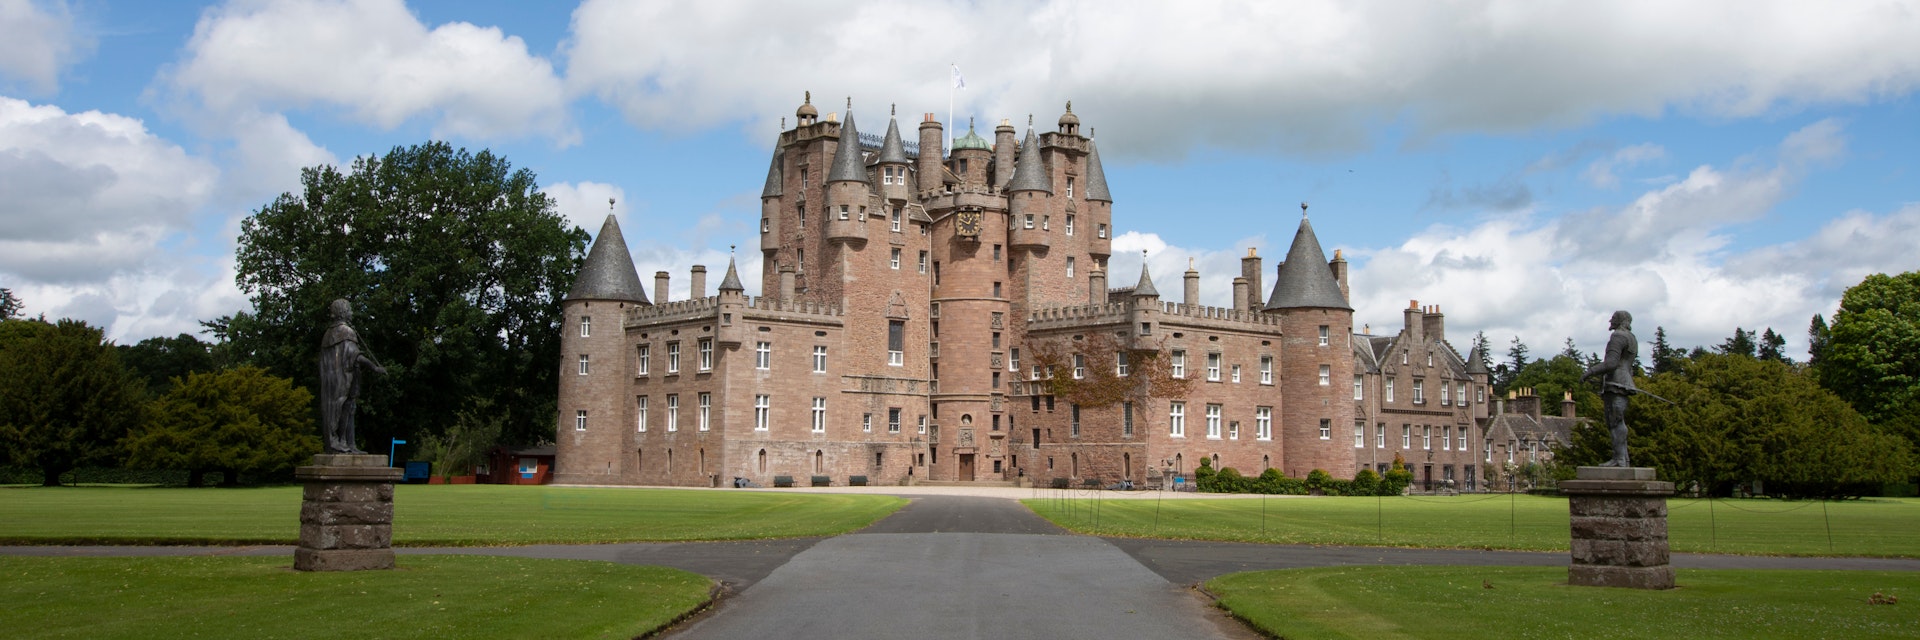 Close up image on a summers day of Glamis castle, Aberdeenshire, Scotland.
1772299841
aberdeen, aberdeenshire, attraction, brochure, building, castle, castles of scotland, destination, dream castles, europe, fairytale castle, glamis, glamis castle, glamis castle scotland, grass, historic, historical, holiday, image, kingdom, landmark, landscape, landscapes, lawn, location, medieval, palace, photo, postcard, scotland, scotlands castles, scotlands landscape, scottish, summer, tourism, tower, travel, travel photography, vacation, wanderlust